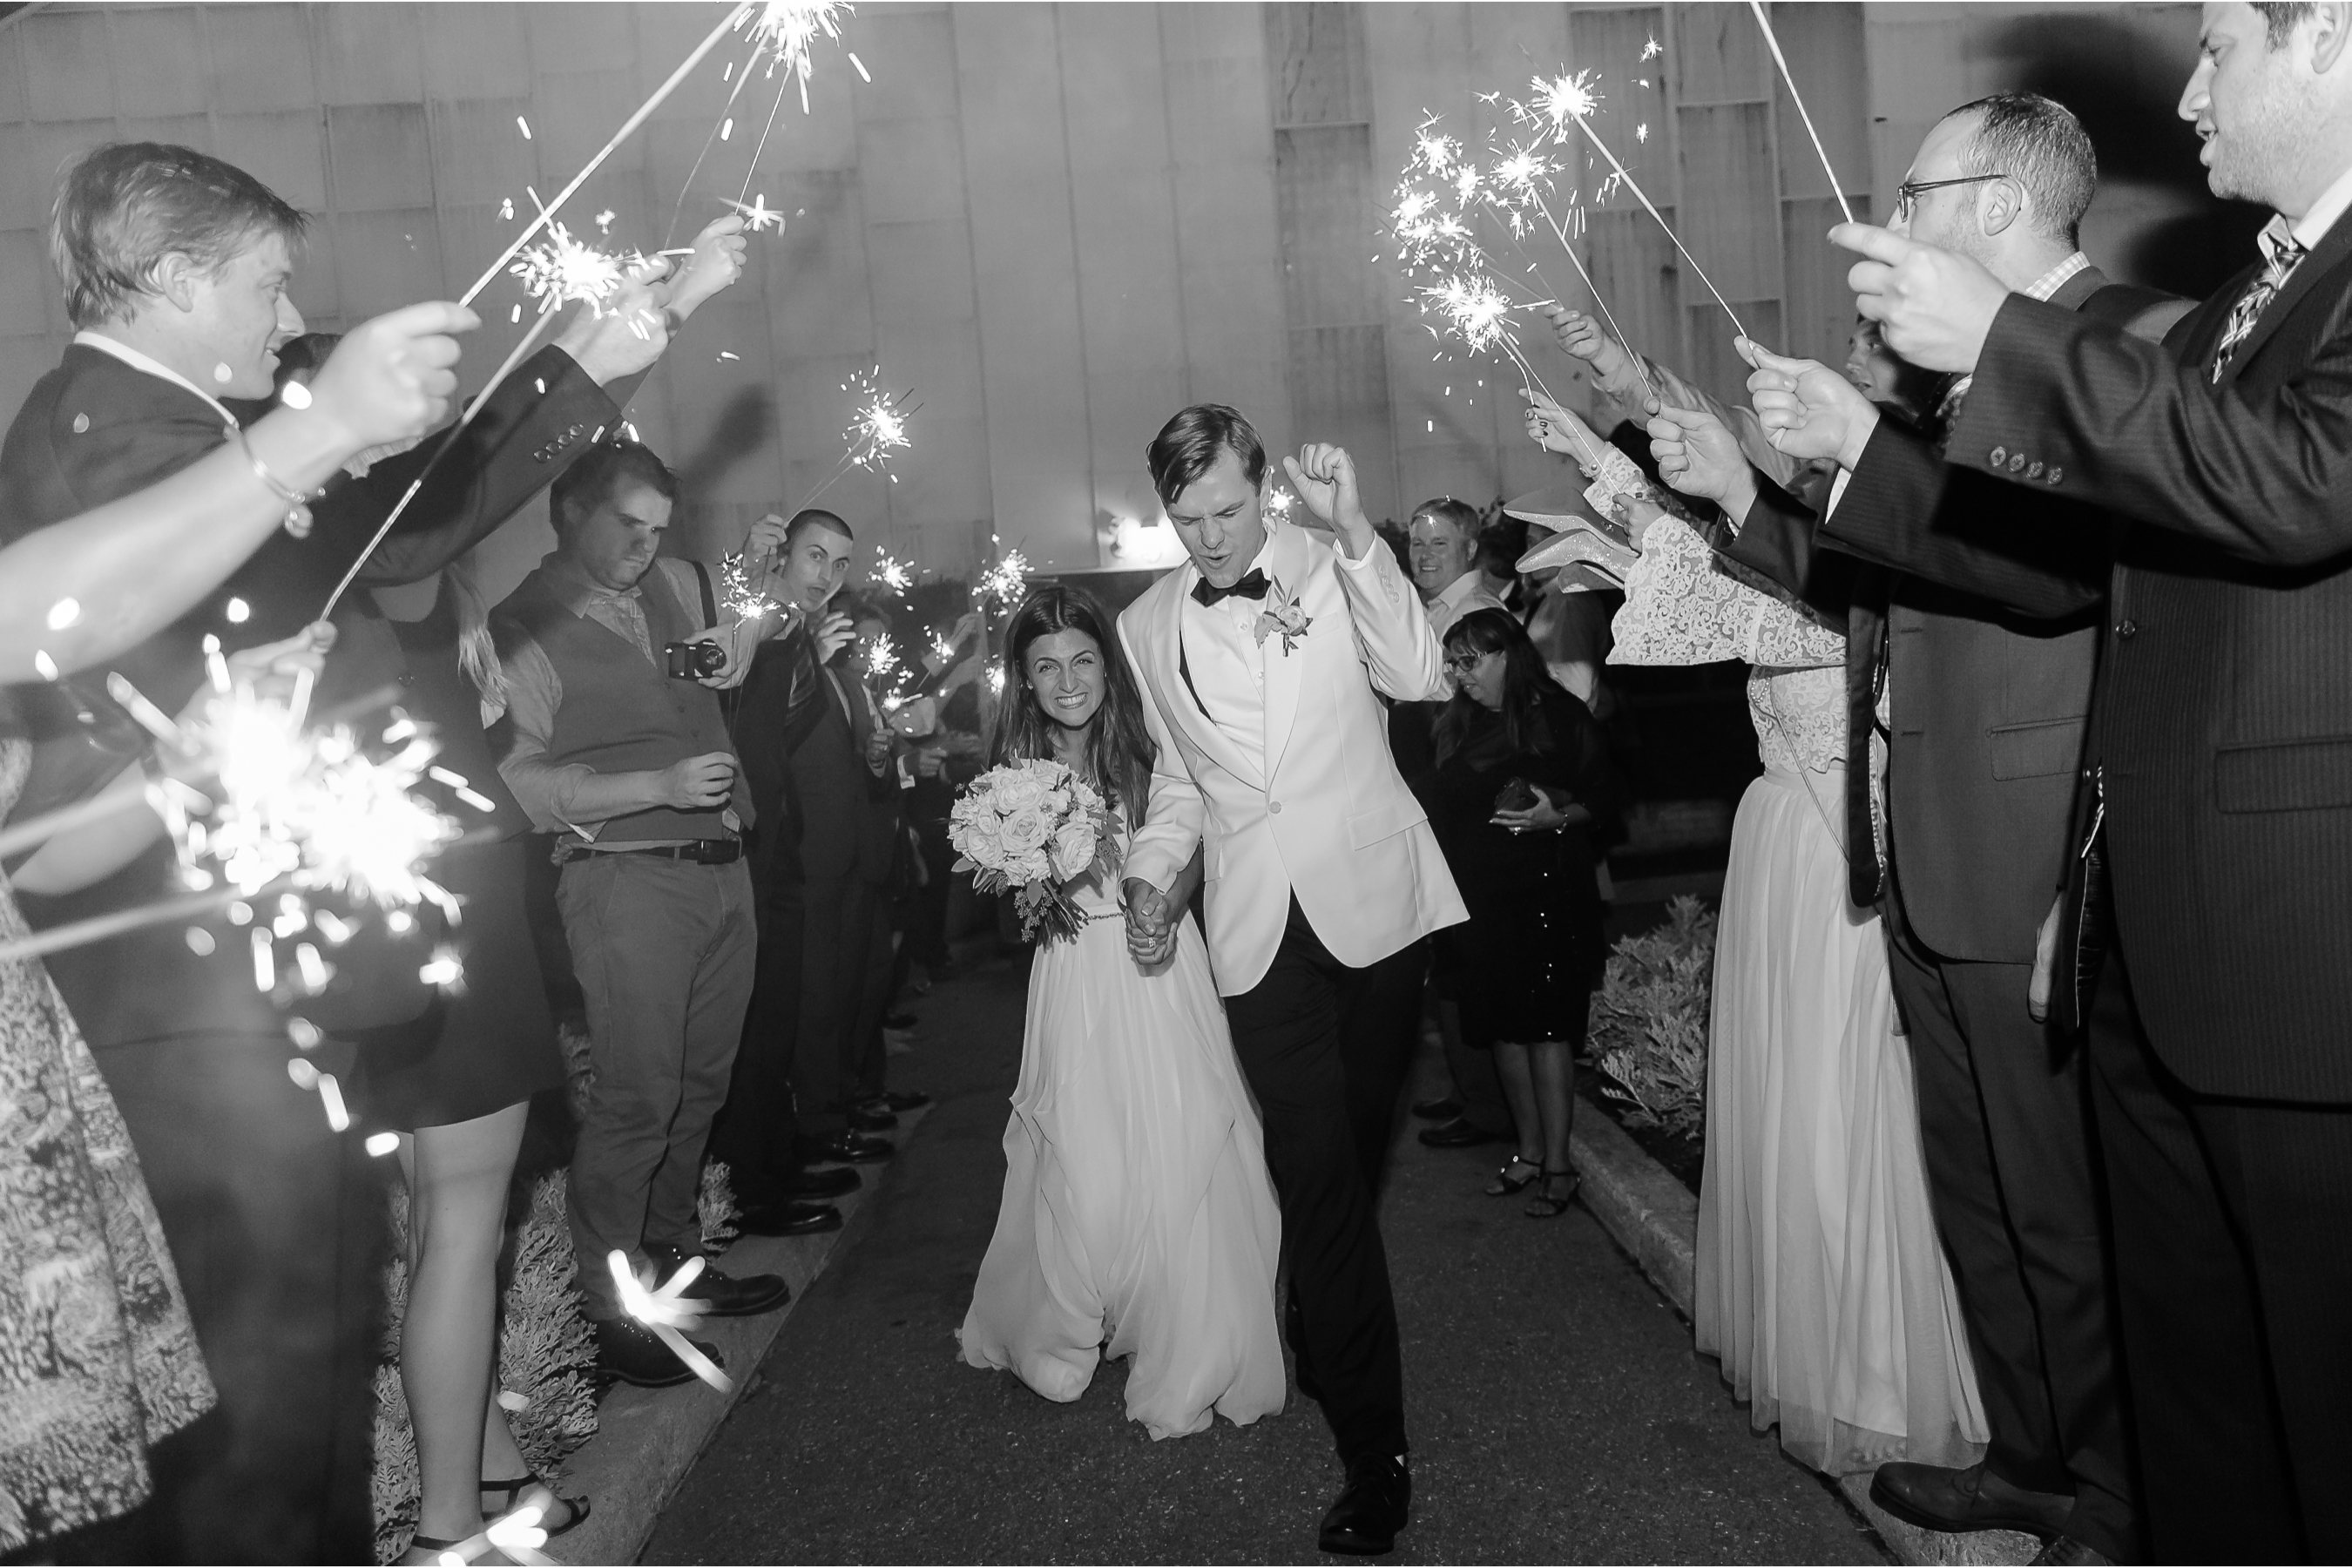 The bride and groom say good bye to their wedding guest with a sparkler send off on their wedding day in Philly.